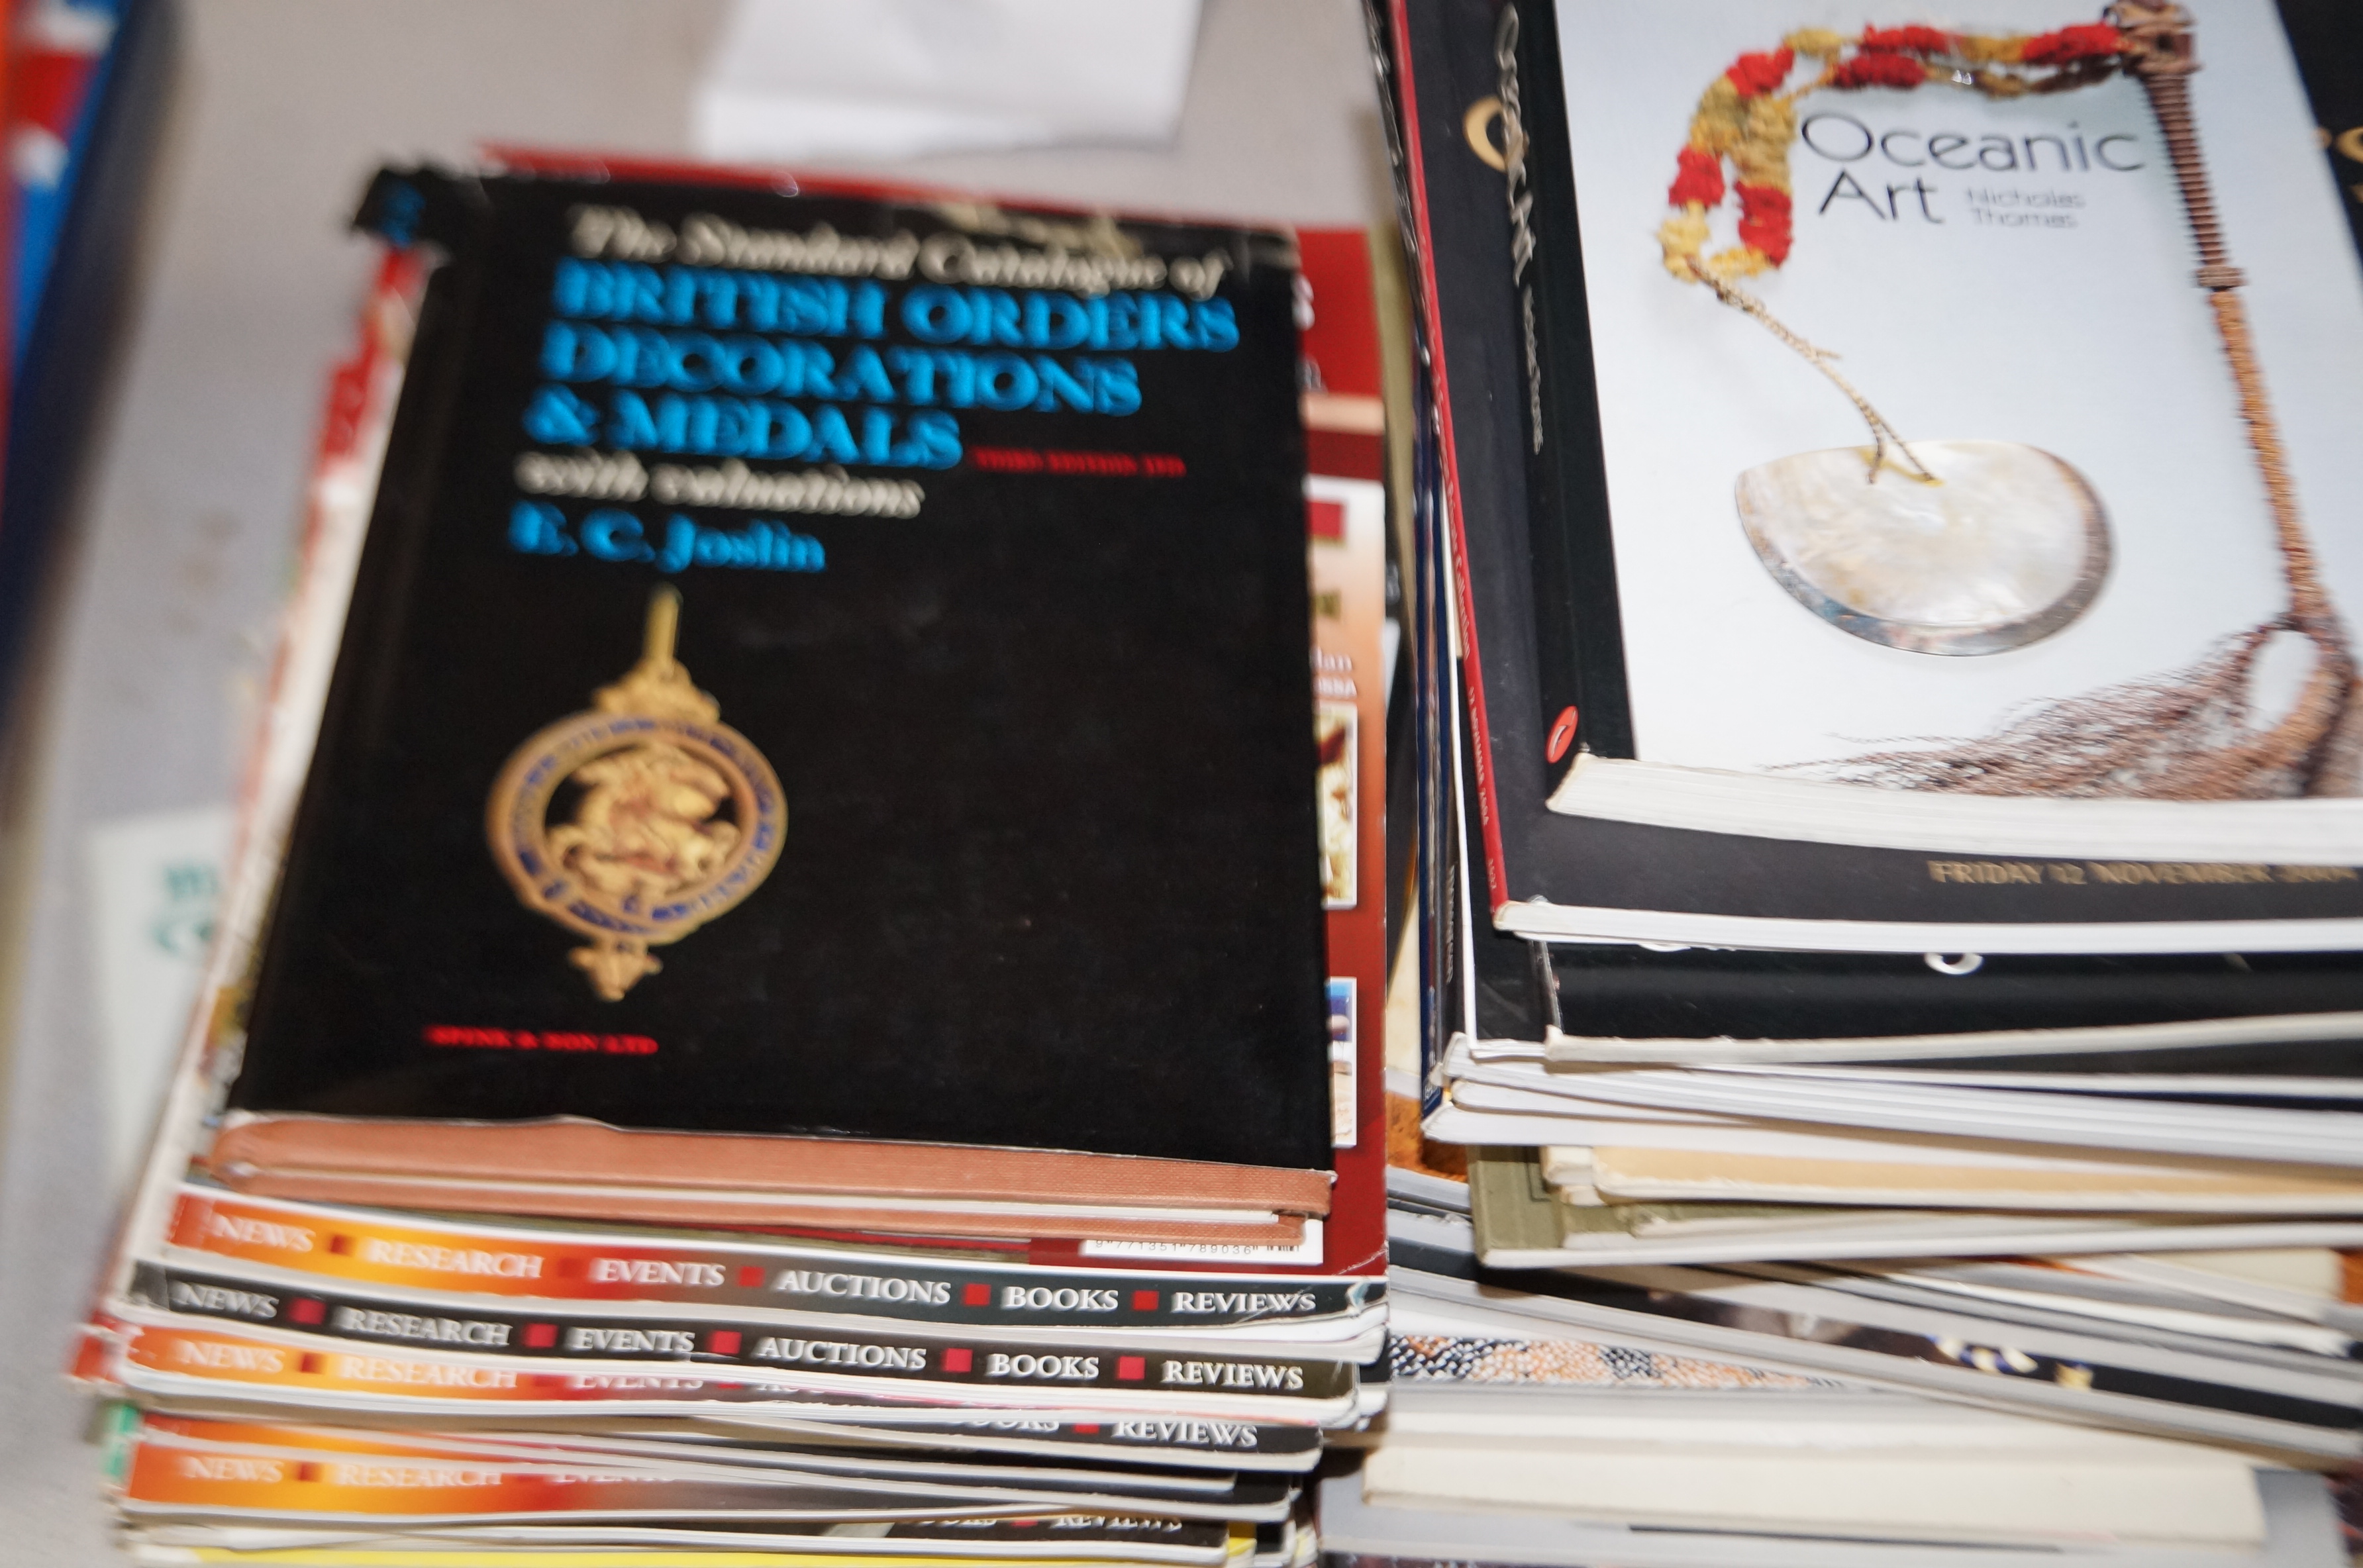 Military reference books together with further art